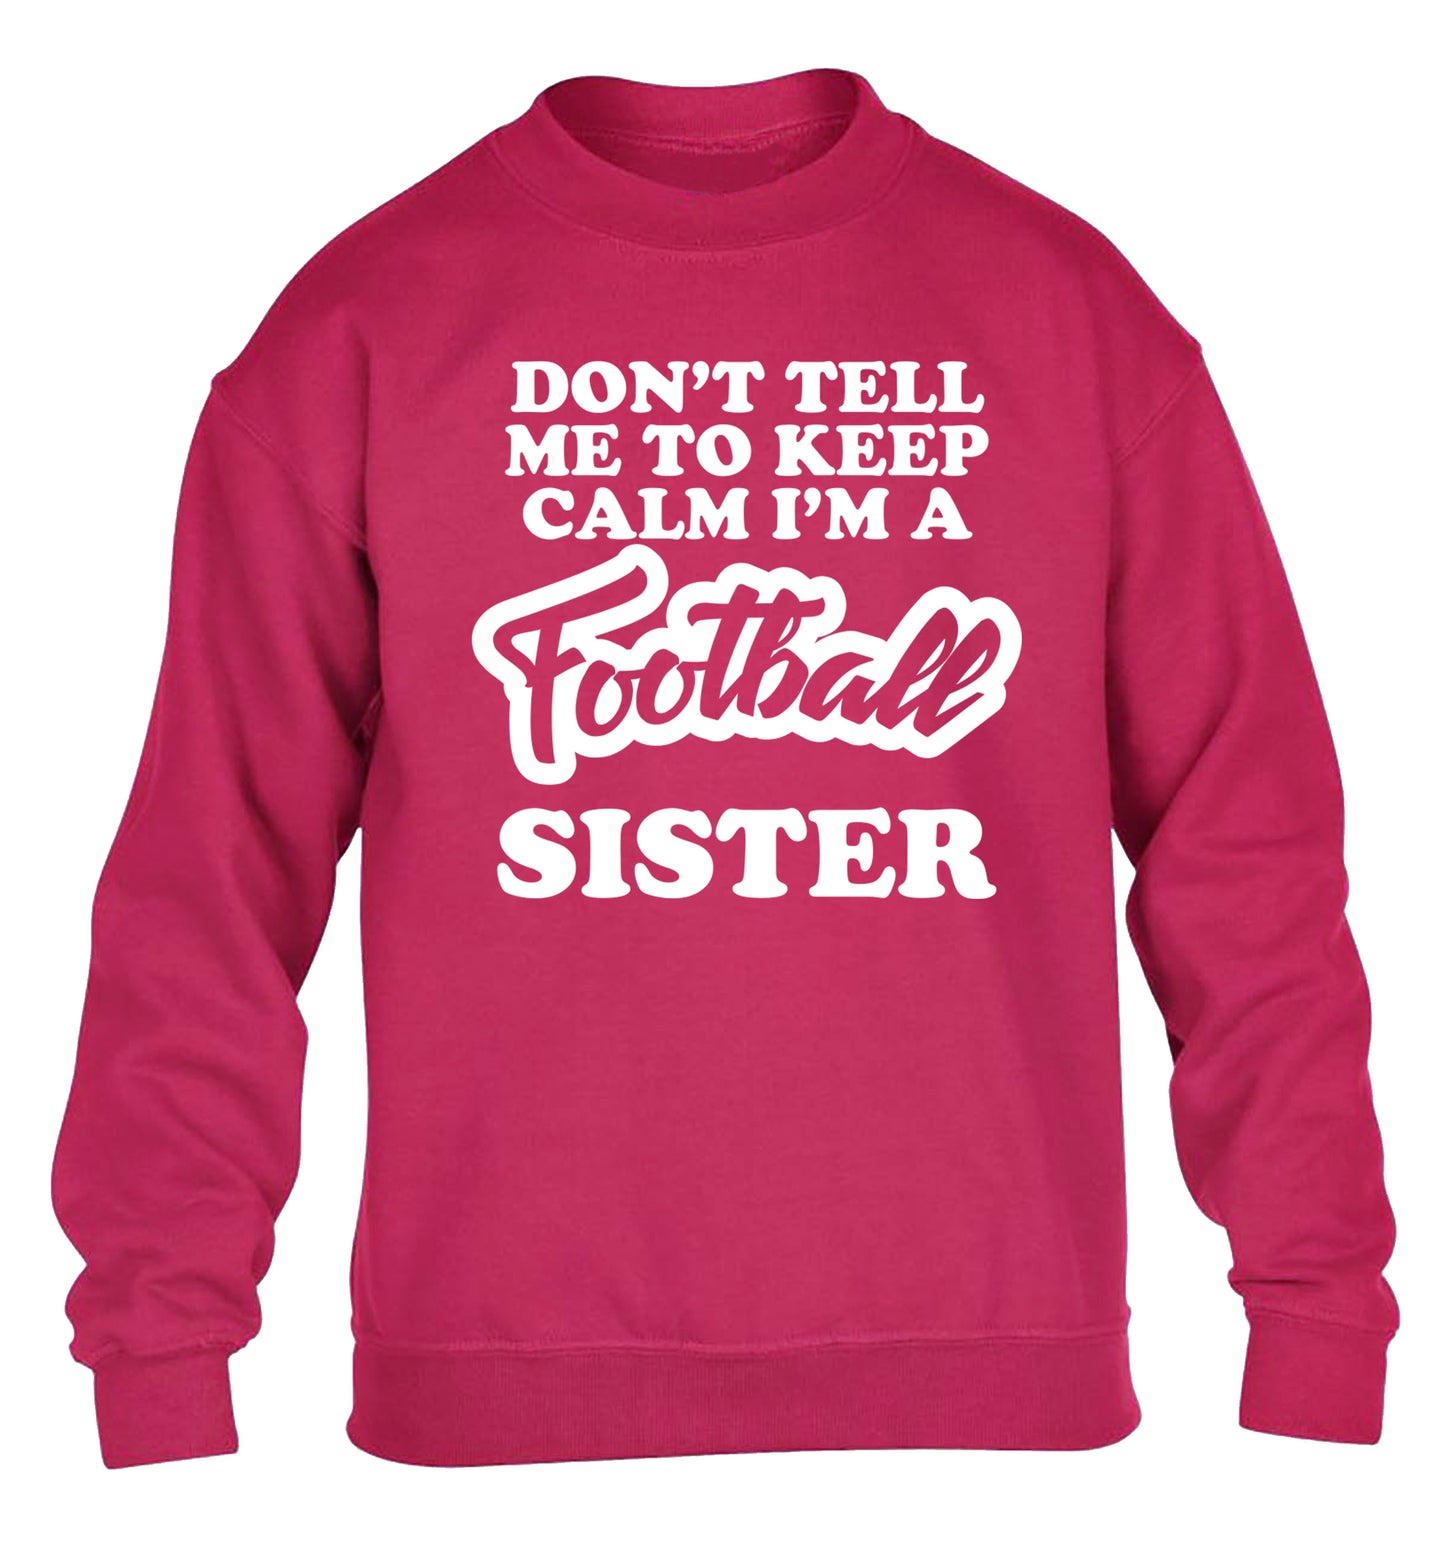 Don't tell me to keep calm I'm a football sister children's pink sweater 12-14 Years